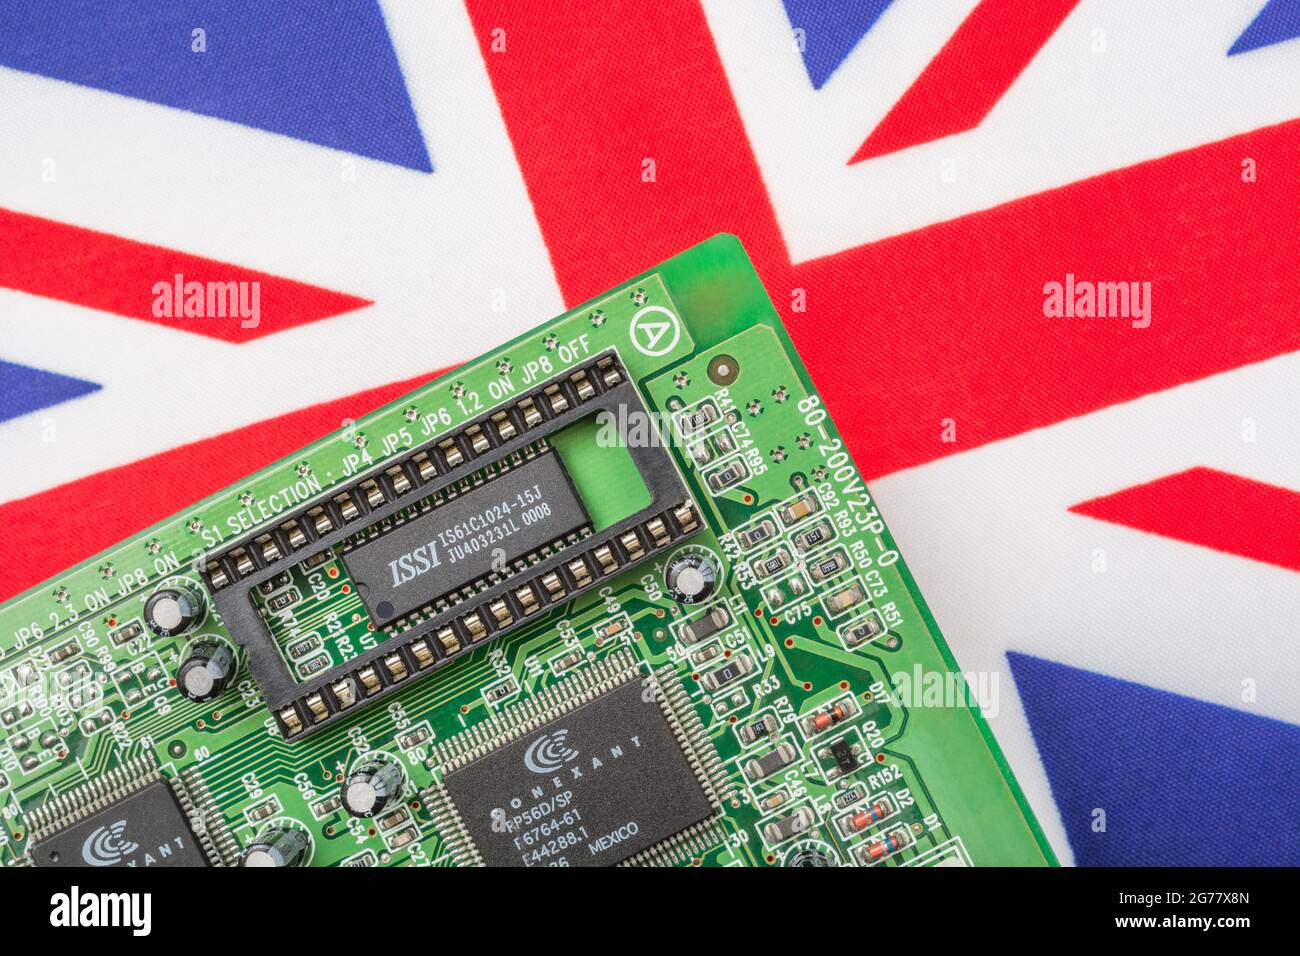 UK Union Jack flag with green PCB circuit board with empty EPROM socket. For 2021 integrated computer chip shortages, semiconductor shortages. Stock Photo